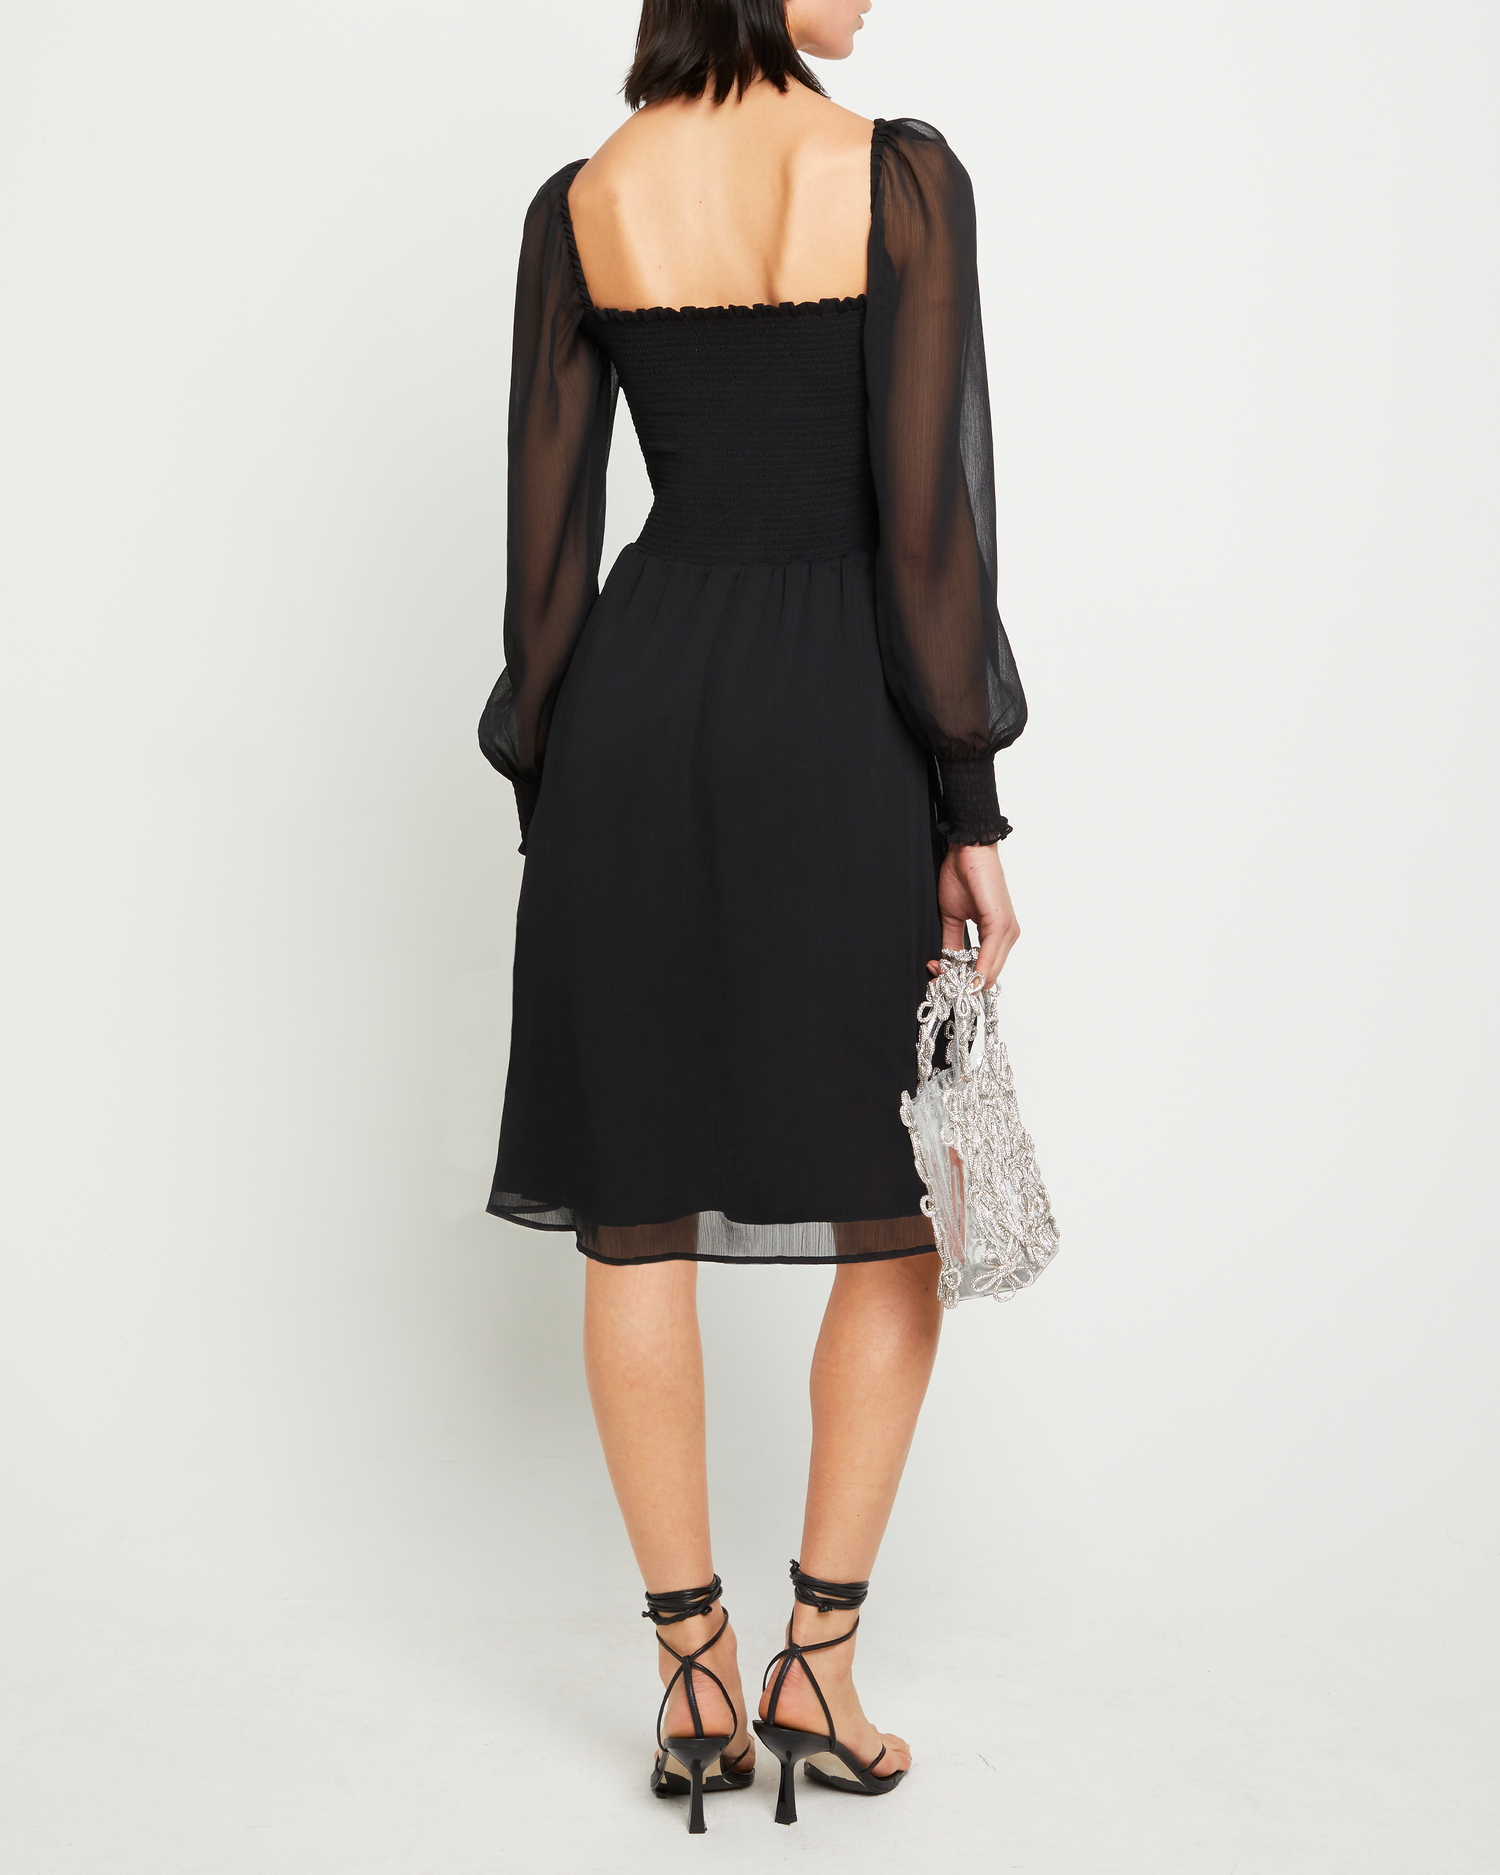 Fifth image of Classic Smocked Midi Dress, a black midi dress, side slit, long, sheer sleeves, puff sleeves, square neckline, smocked bodice